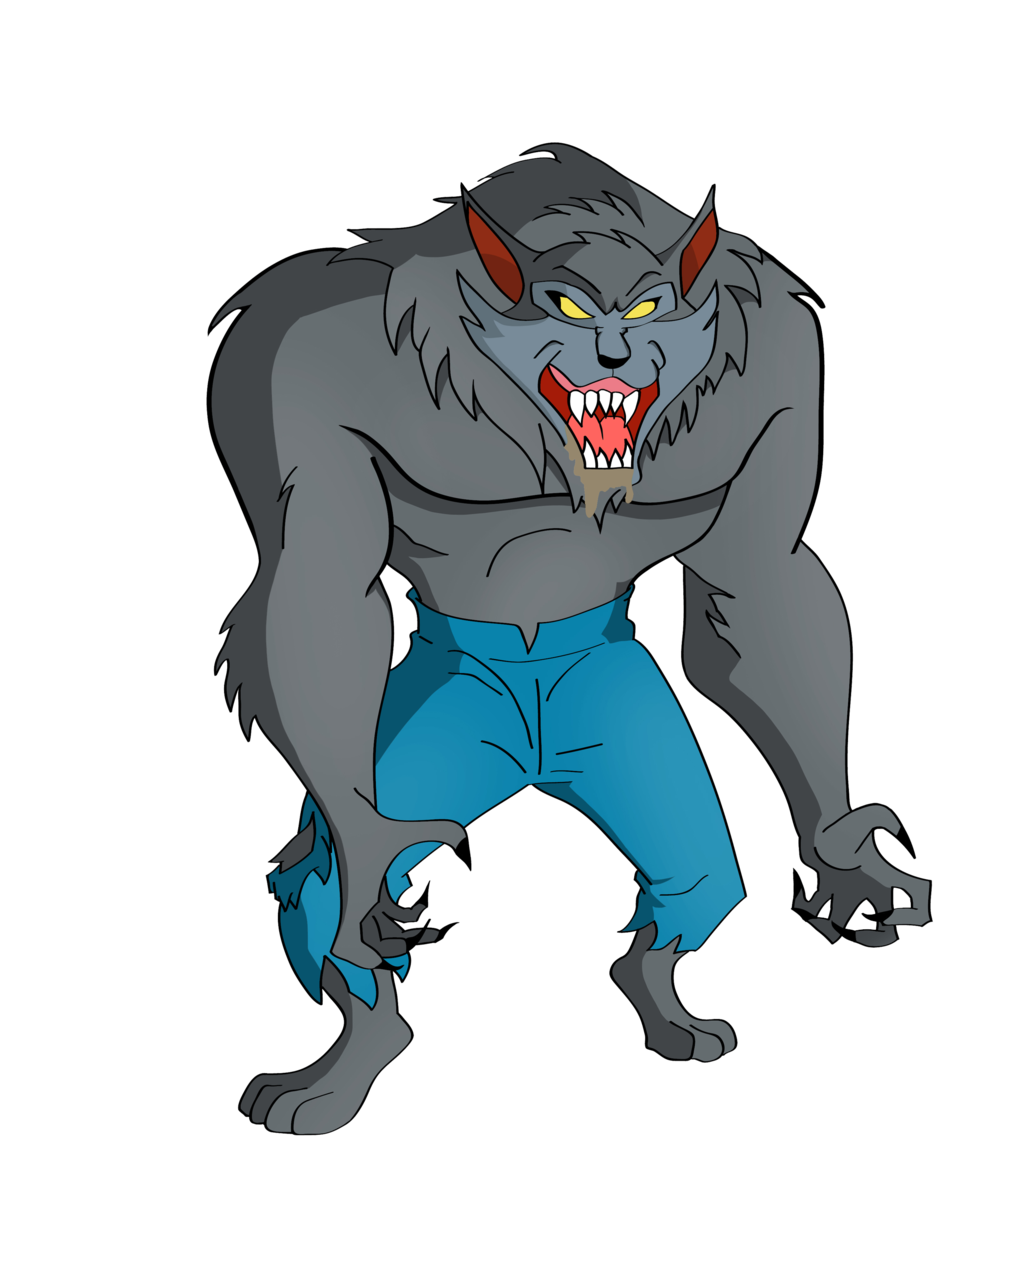 Scooby Doo The Curse Of The Reluctant Werewolf Idea Wiki Fandom Powered By Wikia 3809